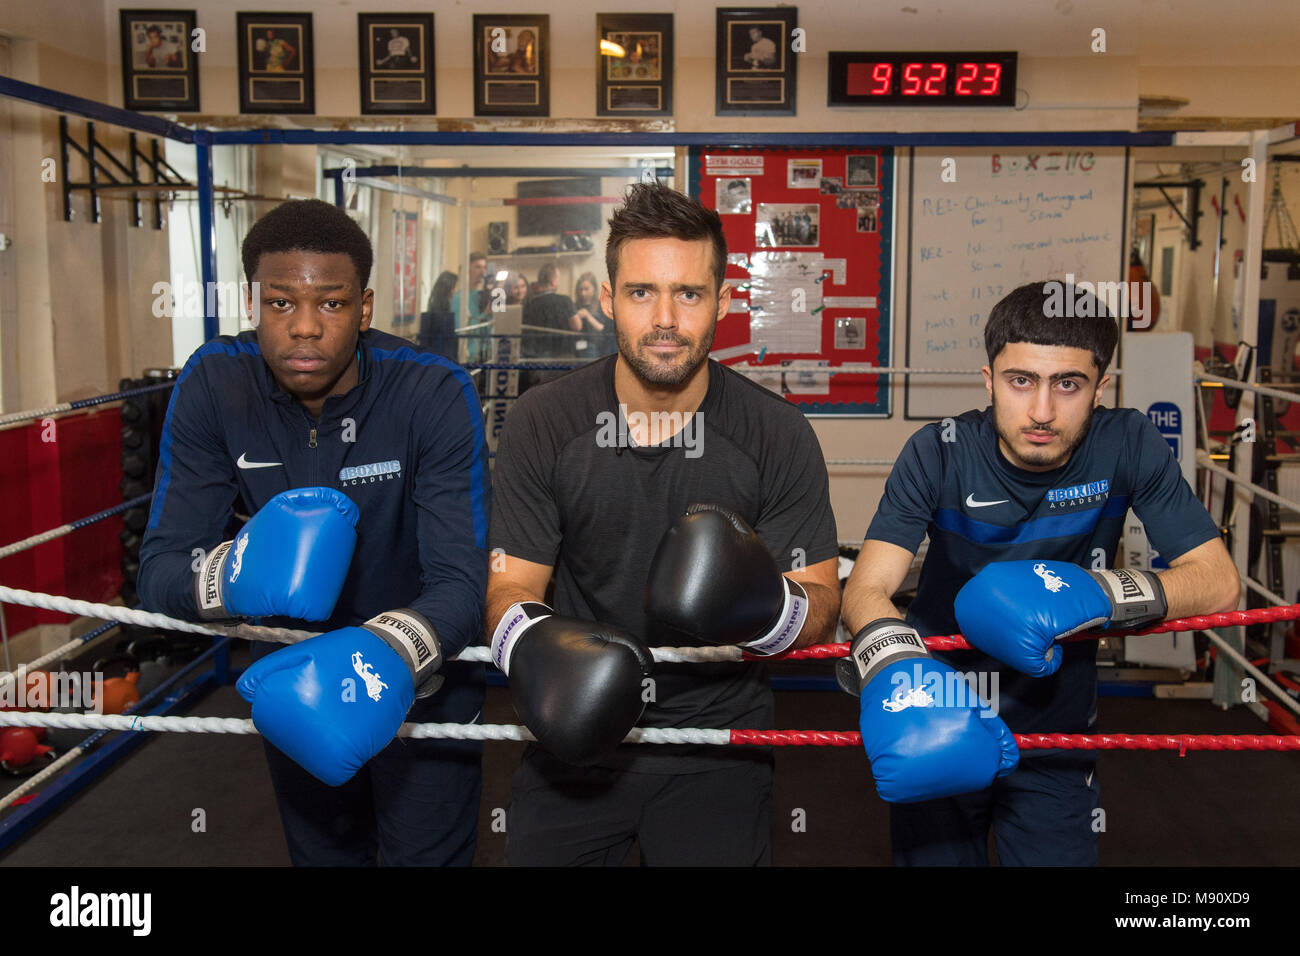 Embargoed to 0001 Thursday March 22 Previously unissued photo dated 13/03/18 of Spencer Matthews (centre) with students Tipoti (left) and Ali (no surnames given) during a visit to the Boxing Academy, a Comic Relief funded sport project in Hackney, London, ahead of Sport Relief boxing challenge. Stock Photo